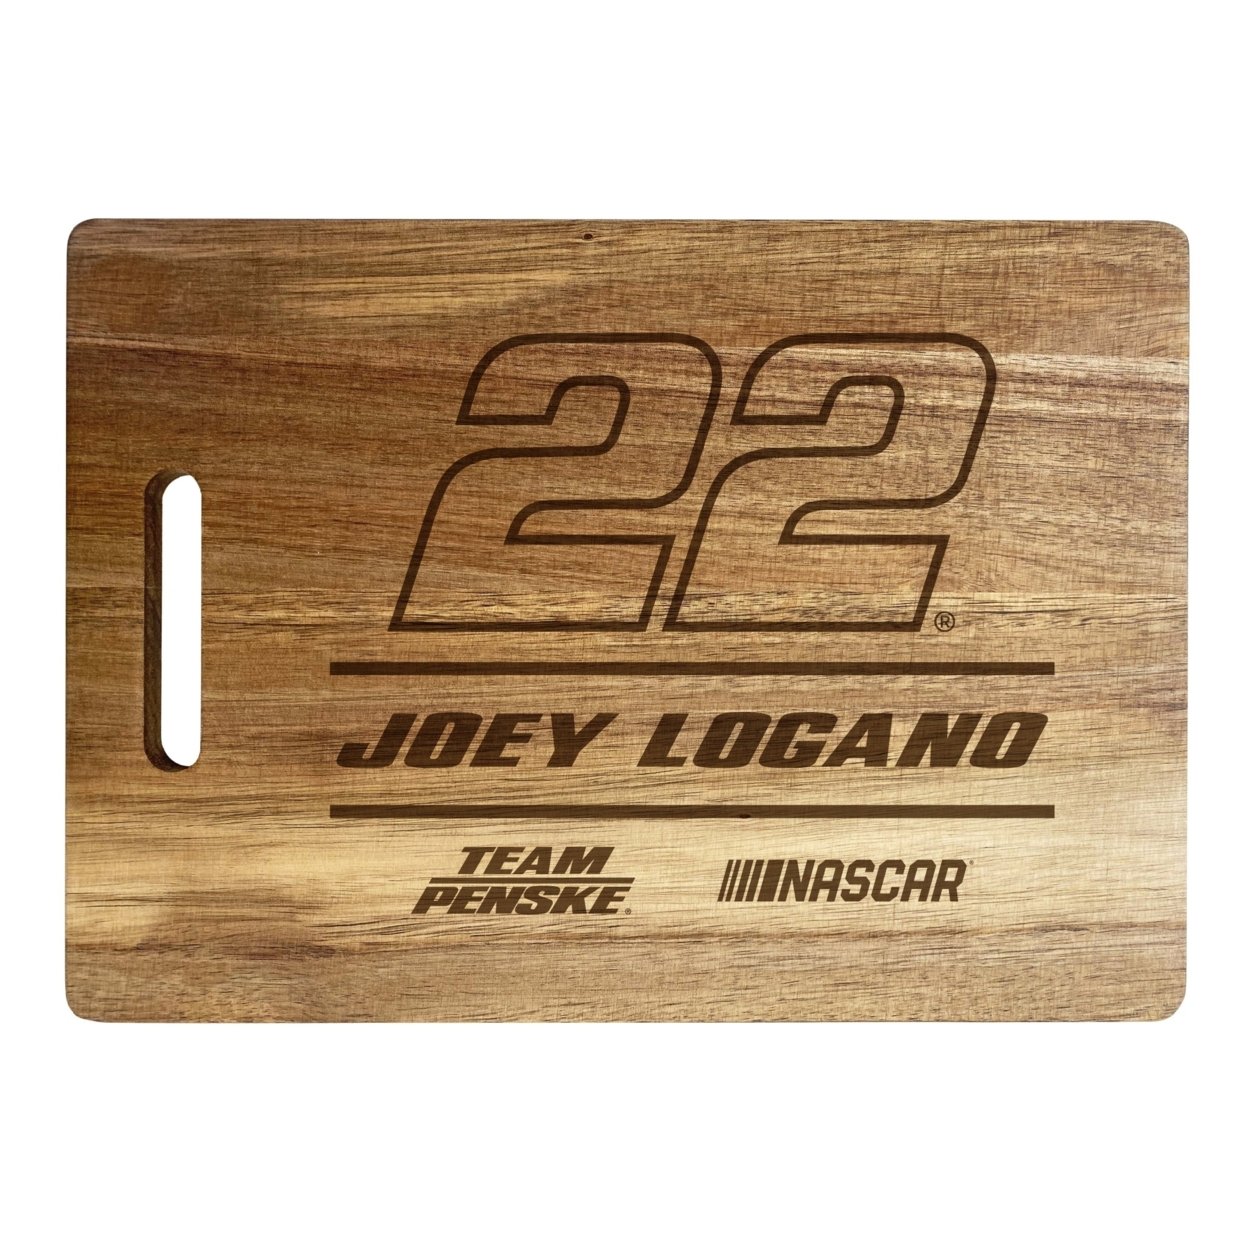 #22 Joey Logano NASCAR Officially Licensed Engraved Wooden Cutting Board